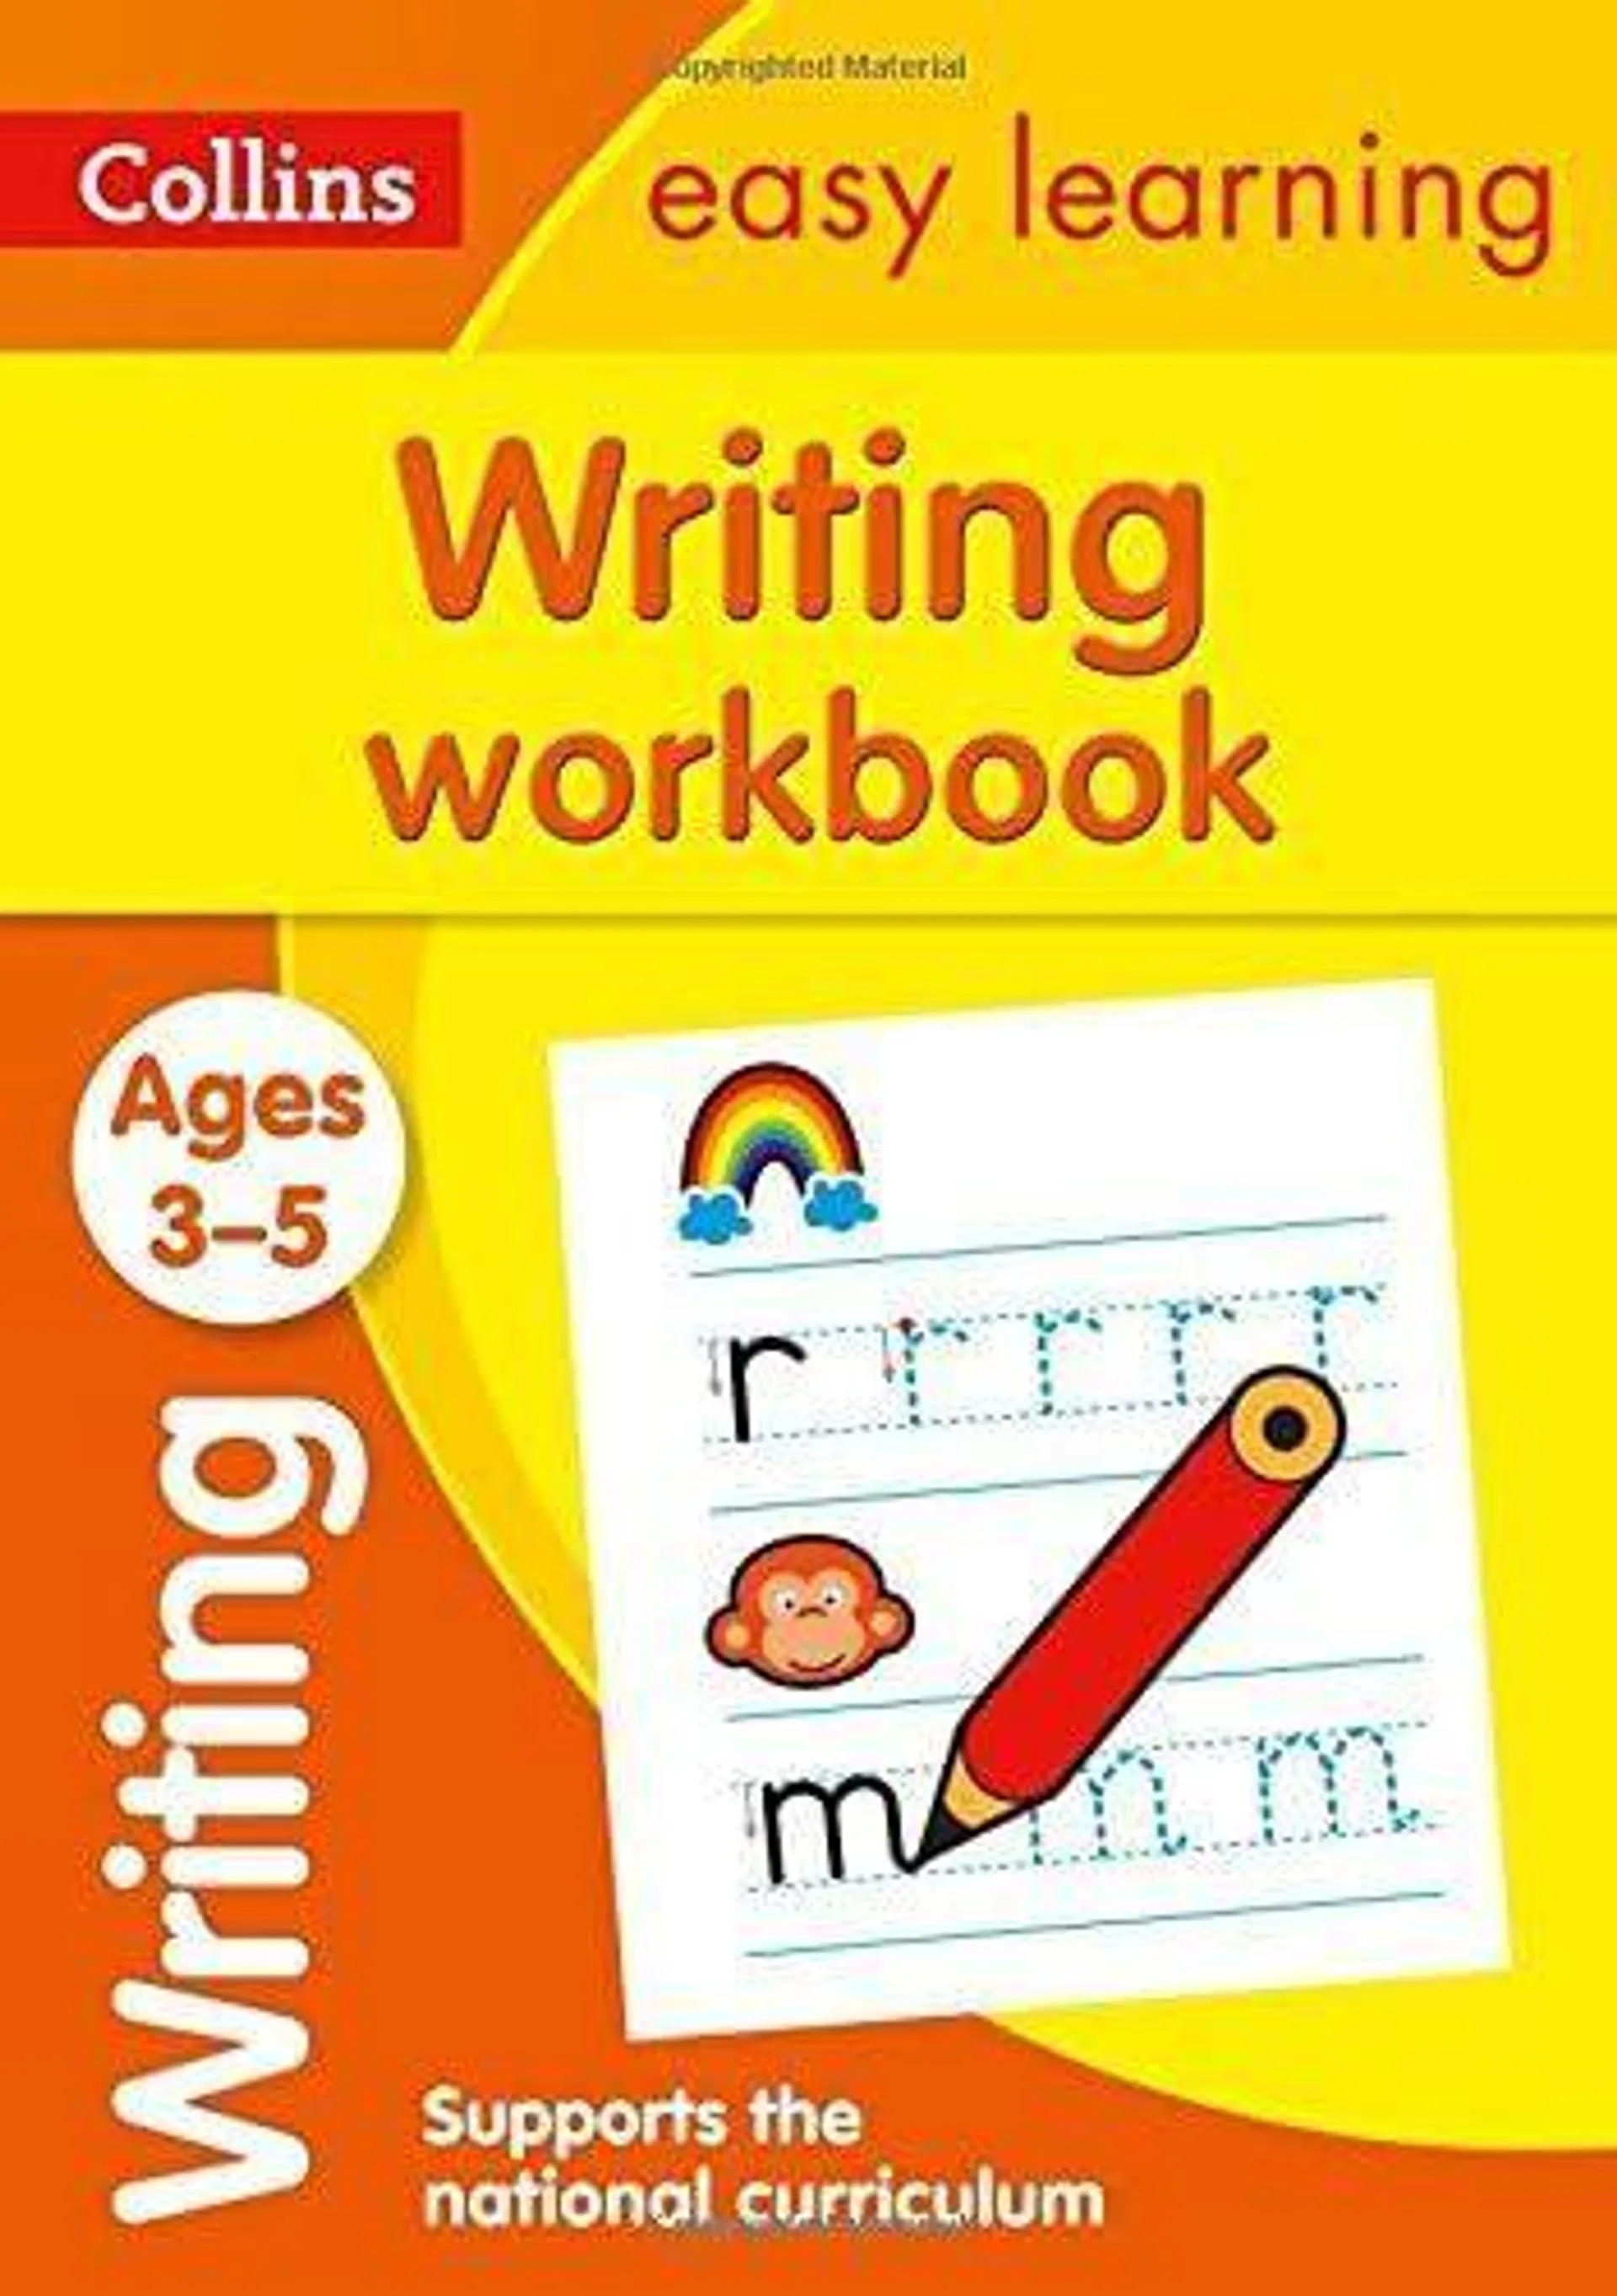 Writing Workbook Ages 3-5 by Collins Easy Learning